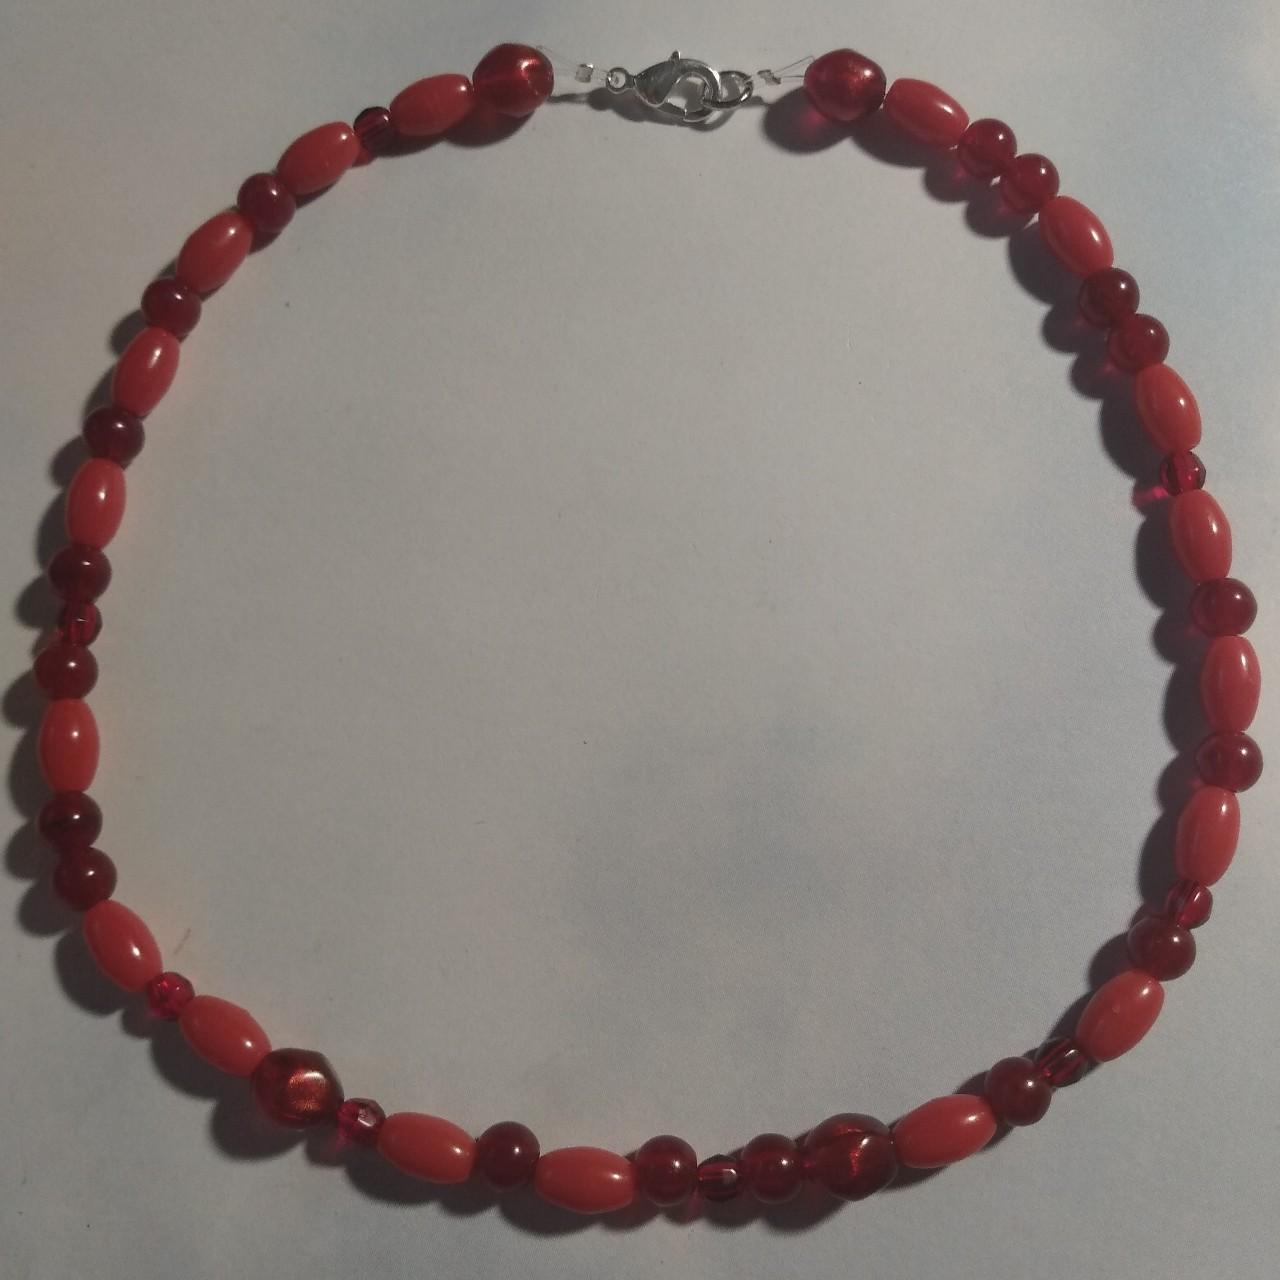 Women's Red and Burgundy Jewellery (2)